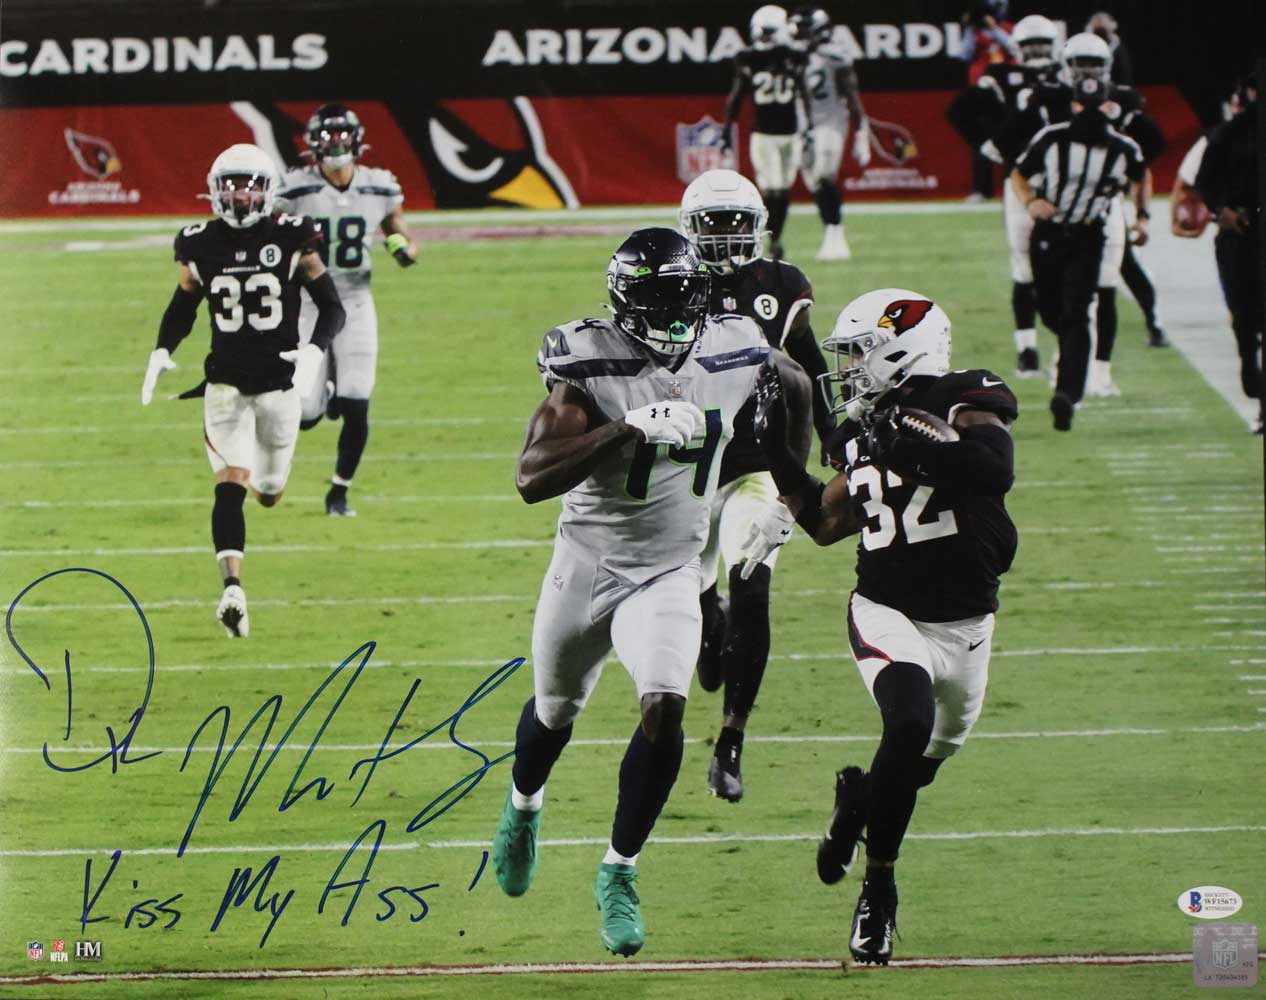 DK Metcalf Autographed/Signed Seattle Seahawks 16x20 Photo Kiss My BAS 31641